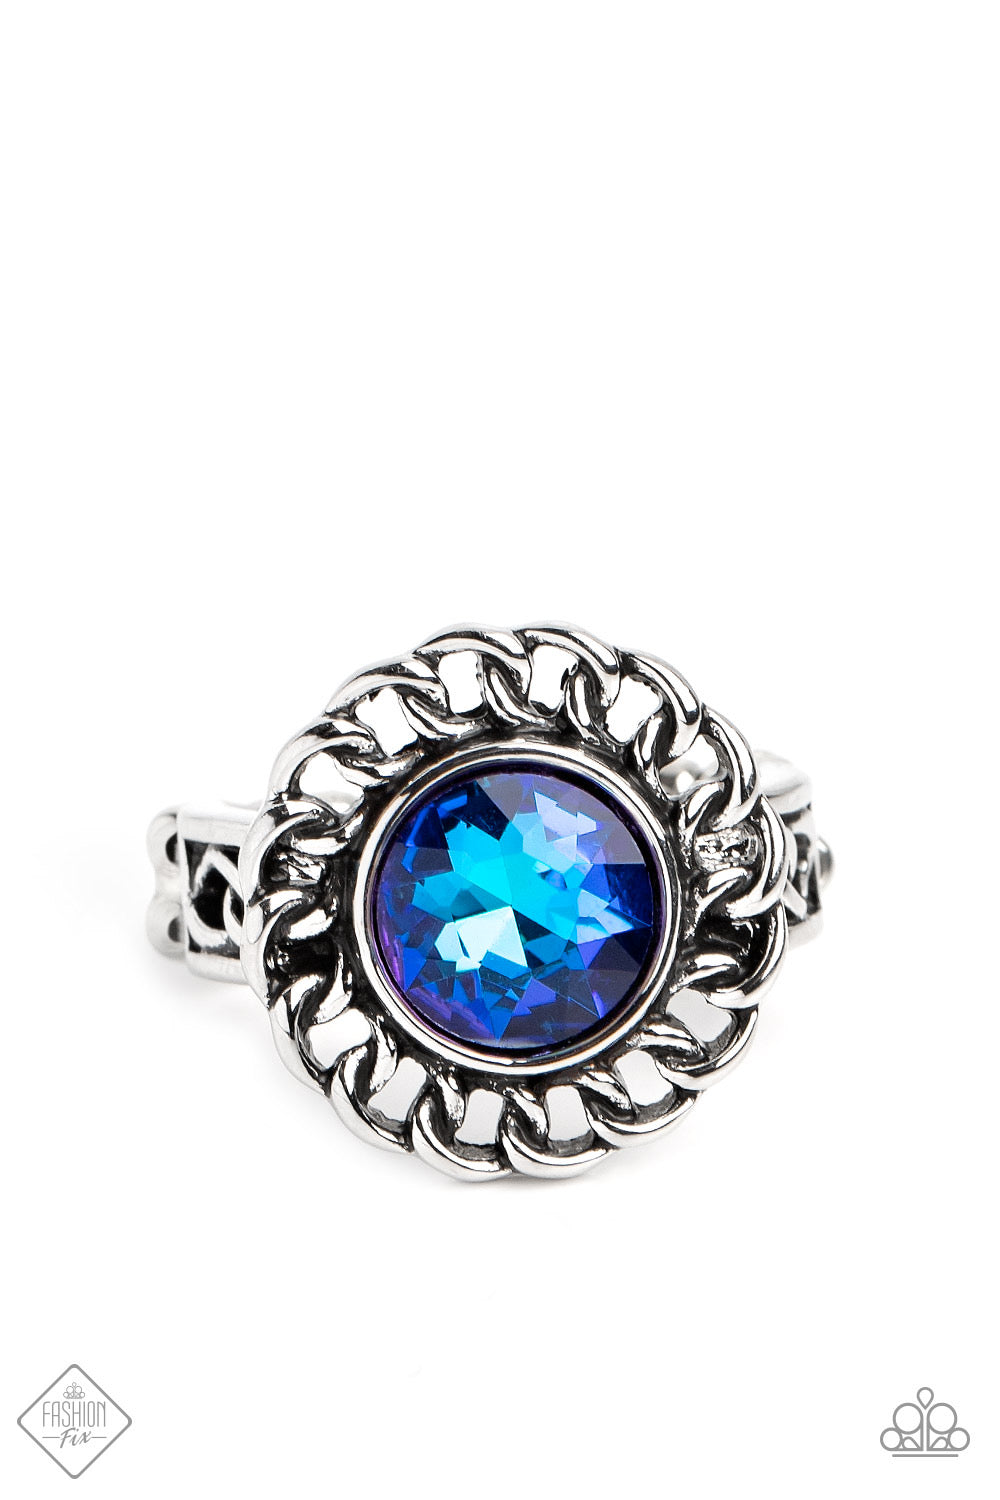 Paparazzi Round Table Runway - Blue Ring- December Fashion Fix-Paparazzi Jewelry Images 